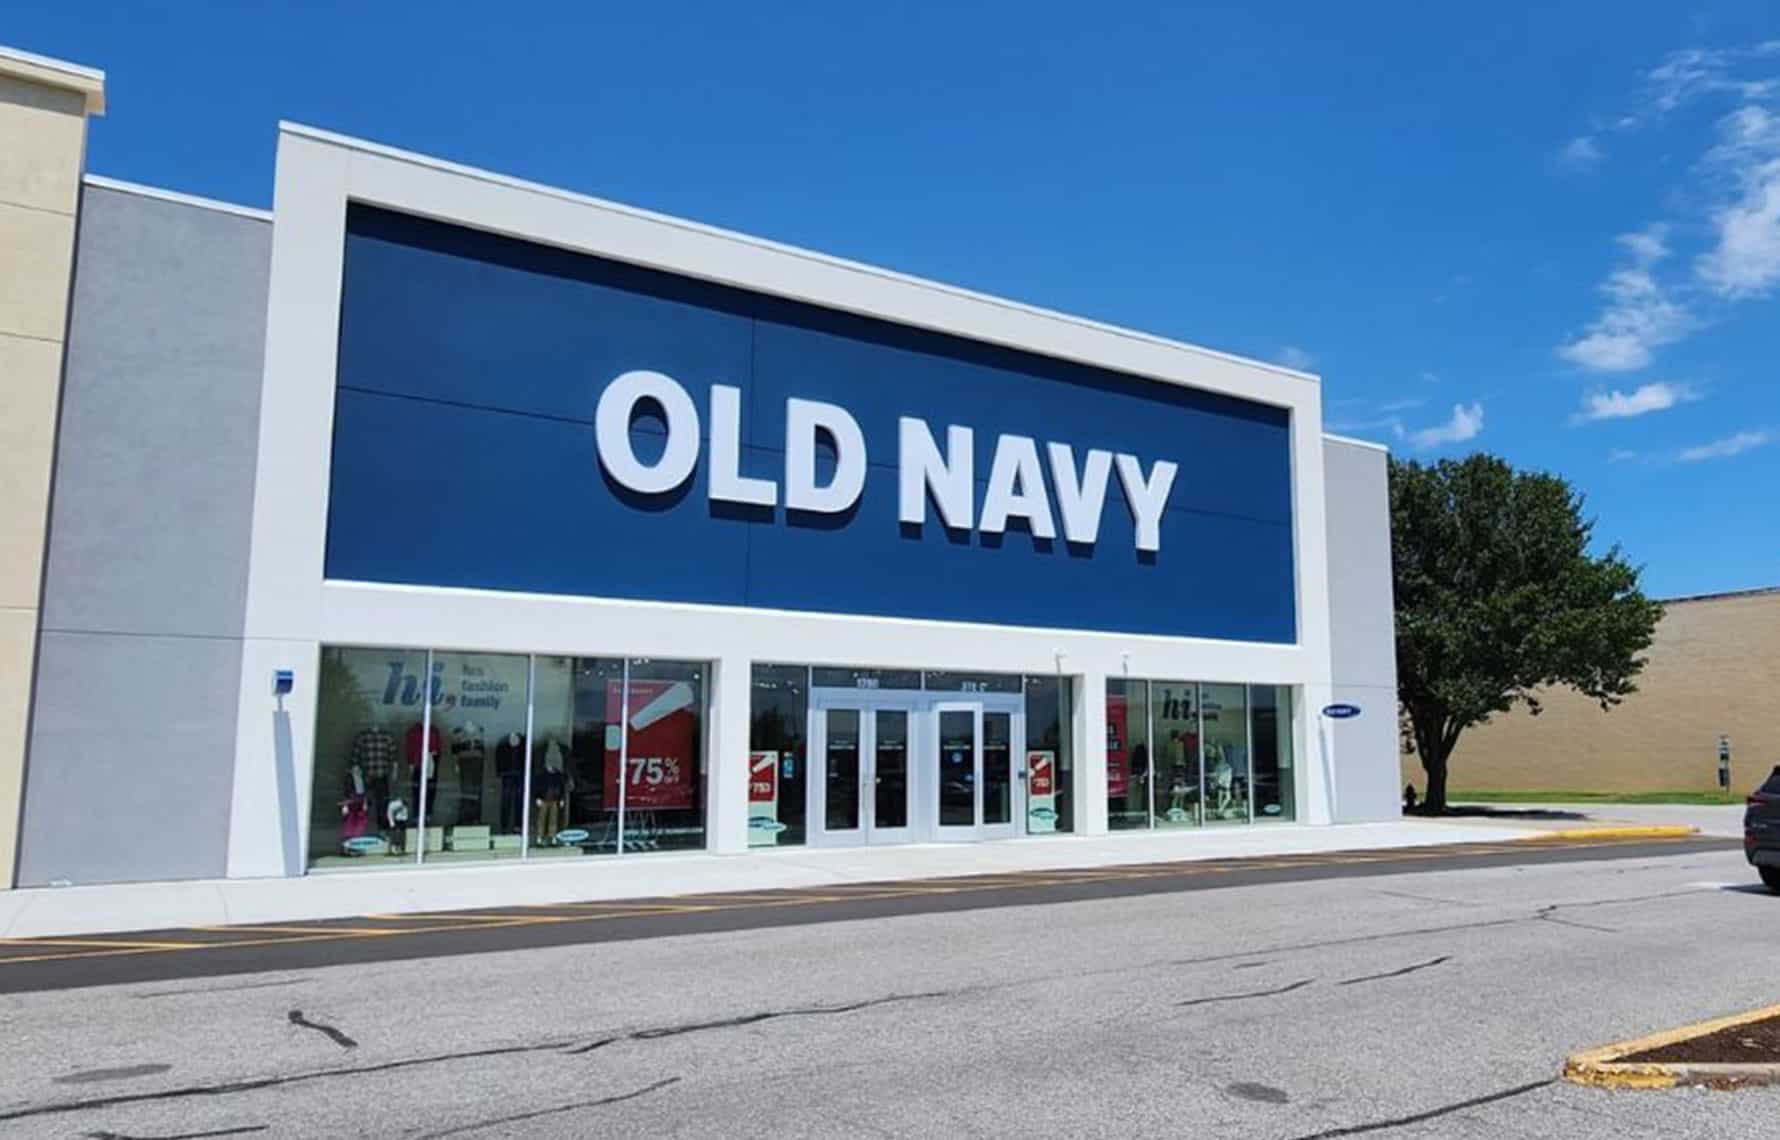 Old Navy storefront showing facade and branded text "OLD NAVY" in an open air mall